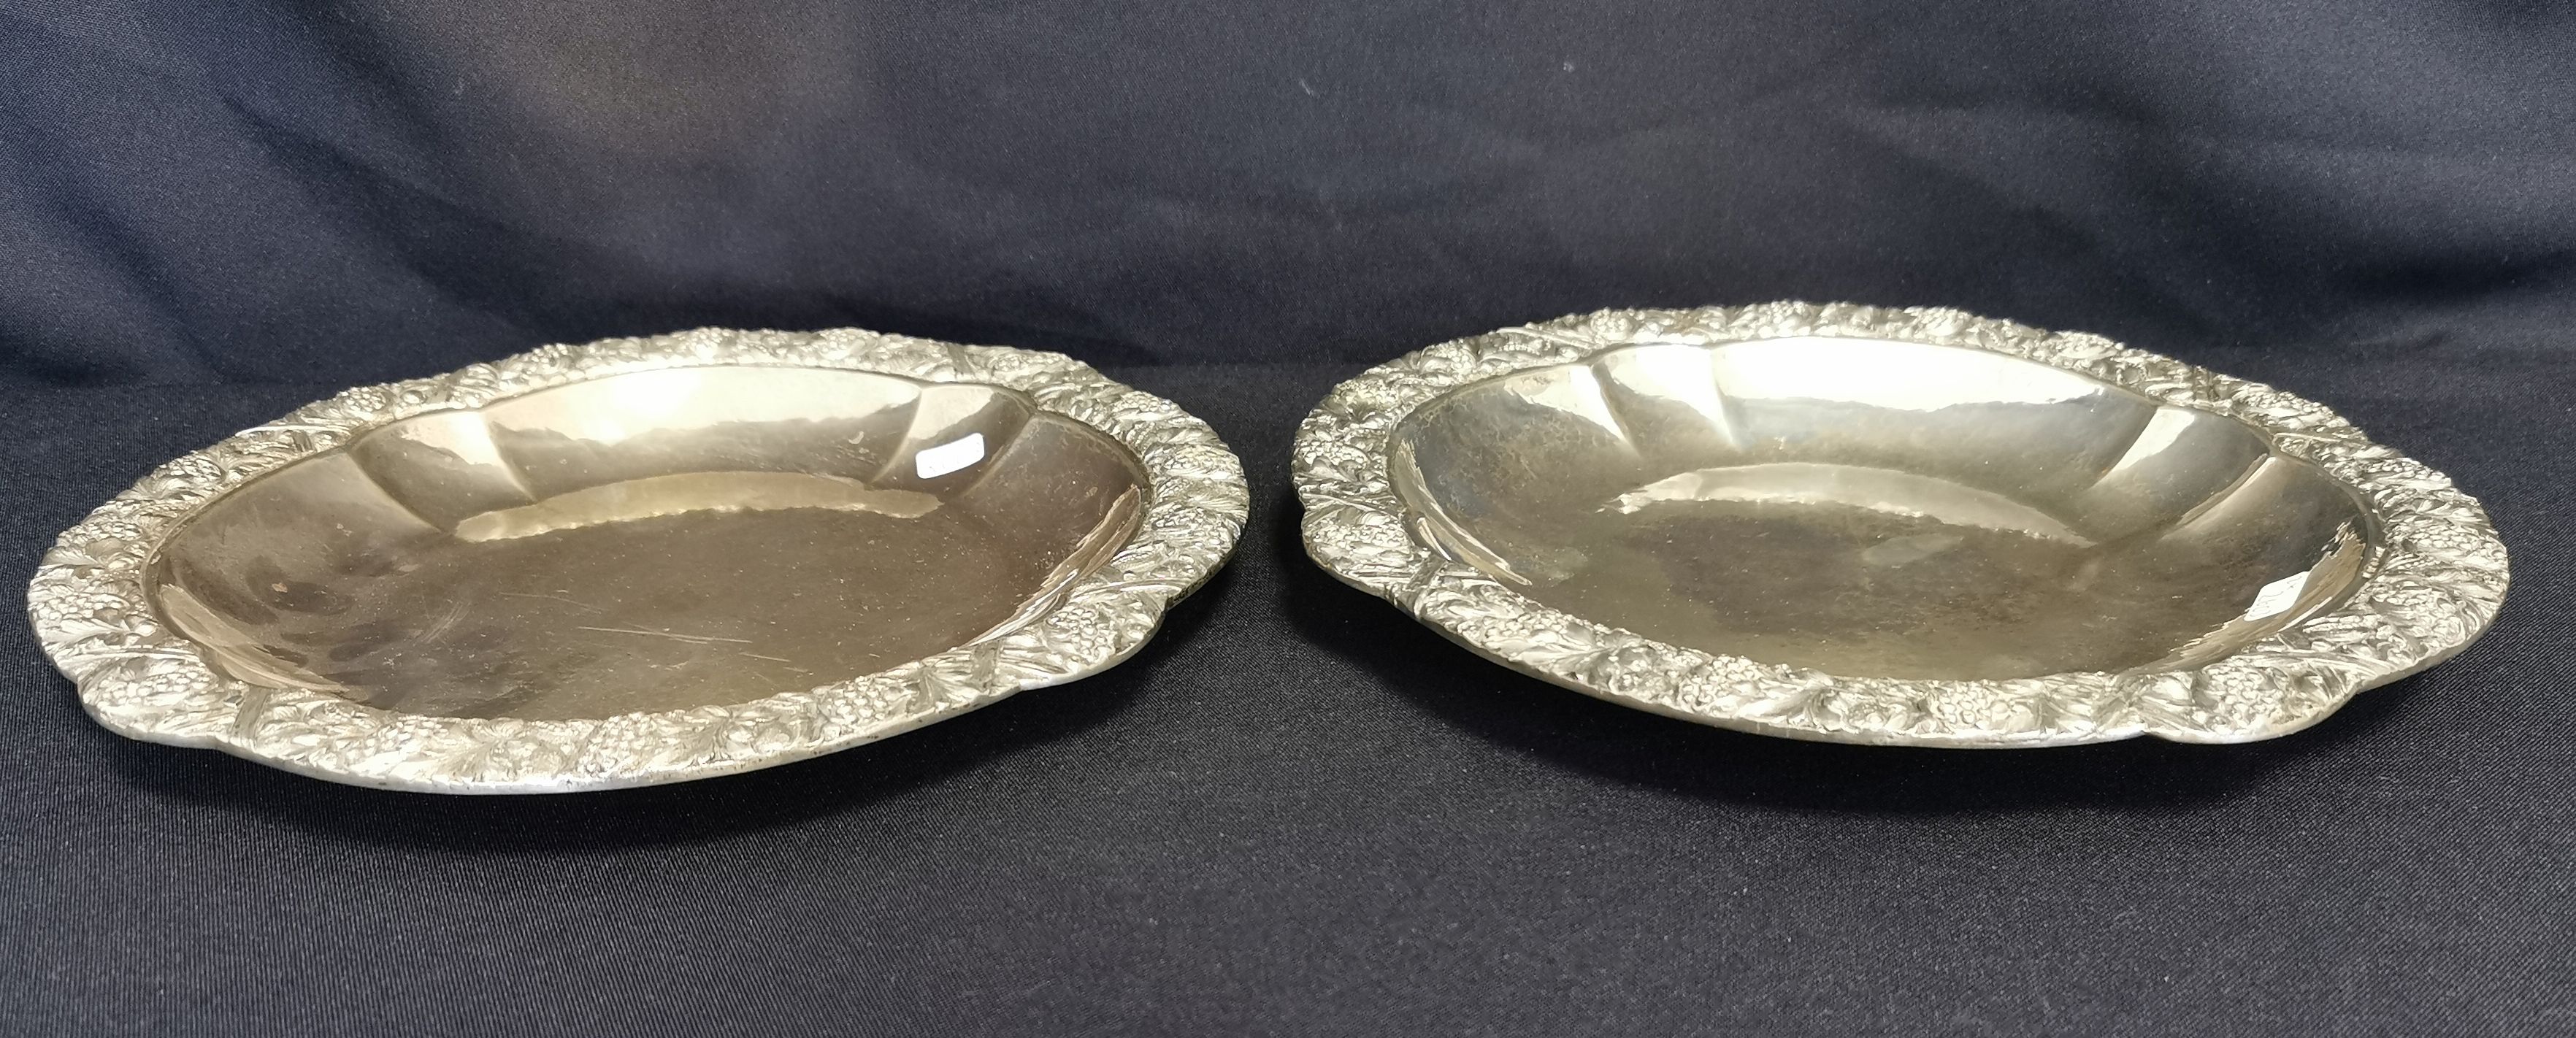 PAIR OF BOWLS WITH RELIEF DECORATION - Image 4 of 4